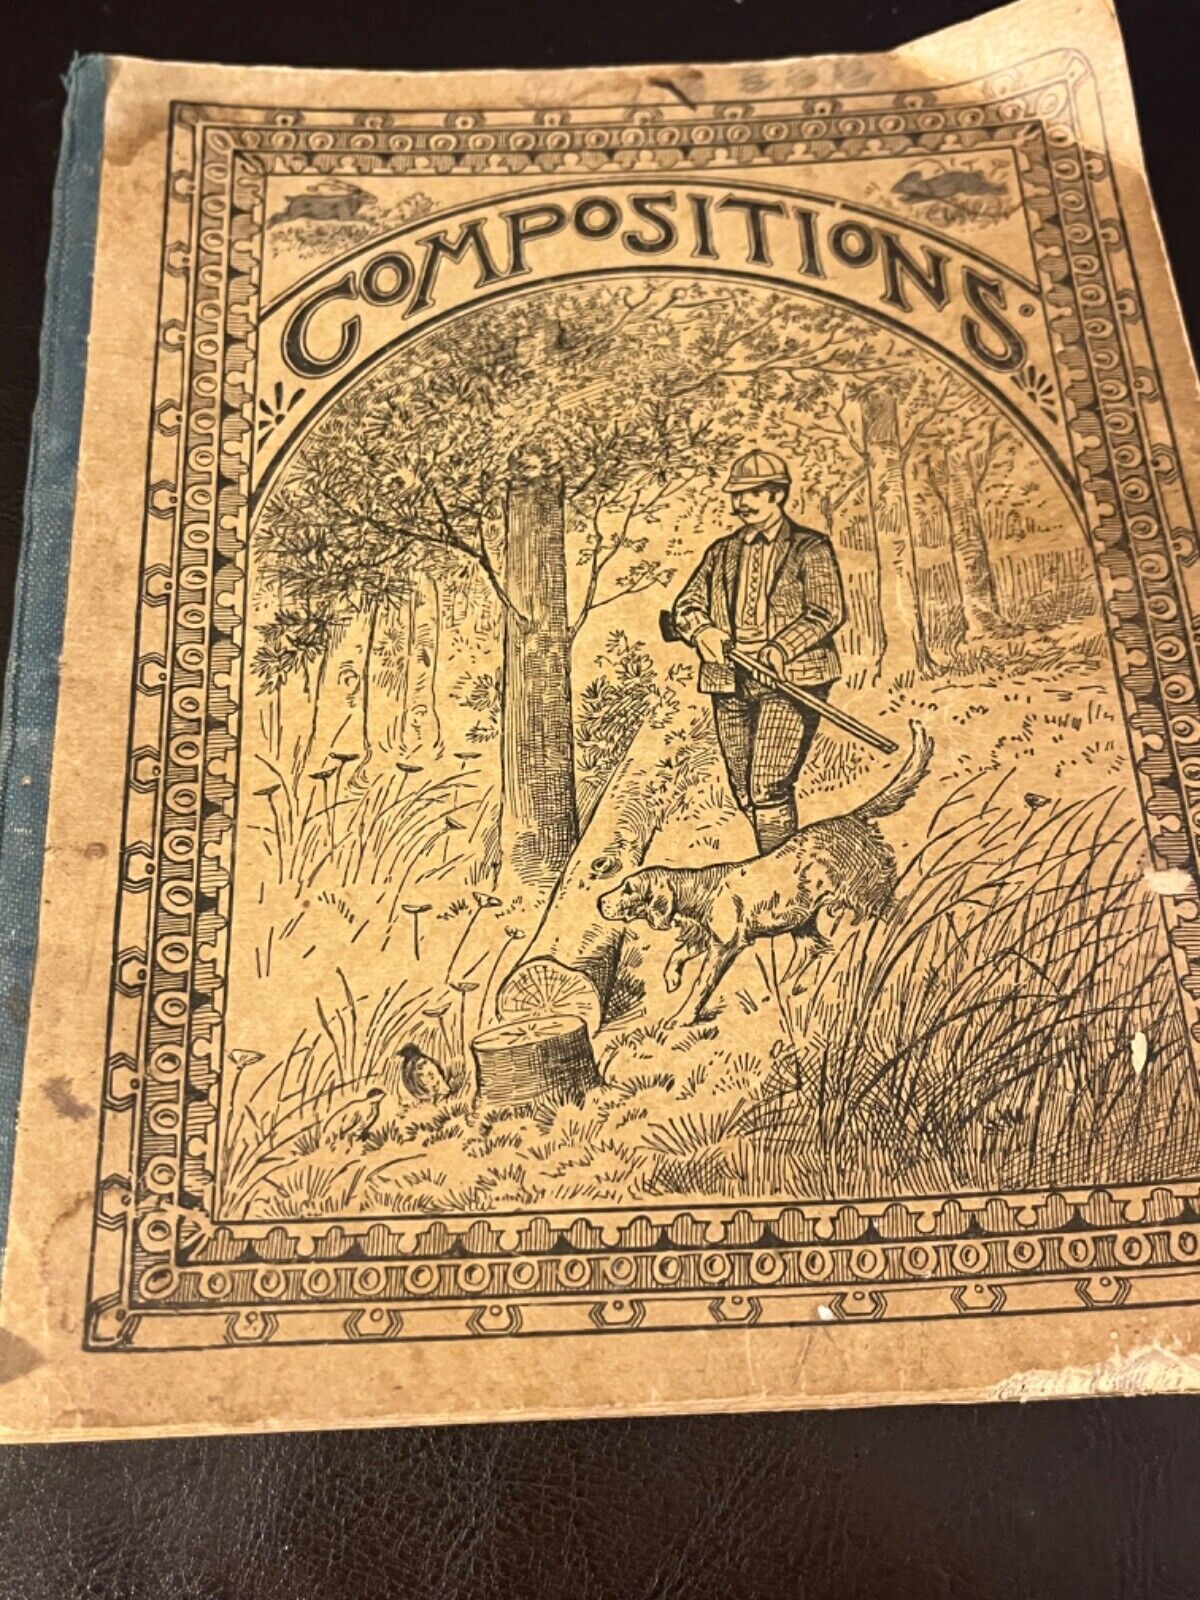 🔥Antique 1917 Medical Compositions Notebook. Contains Some Notes. Used.